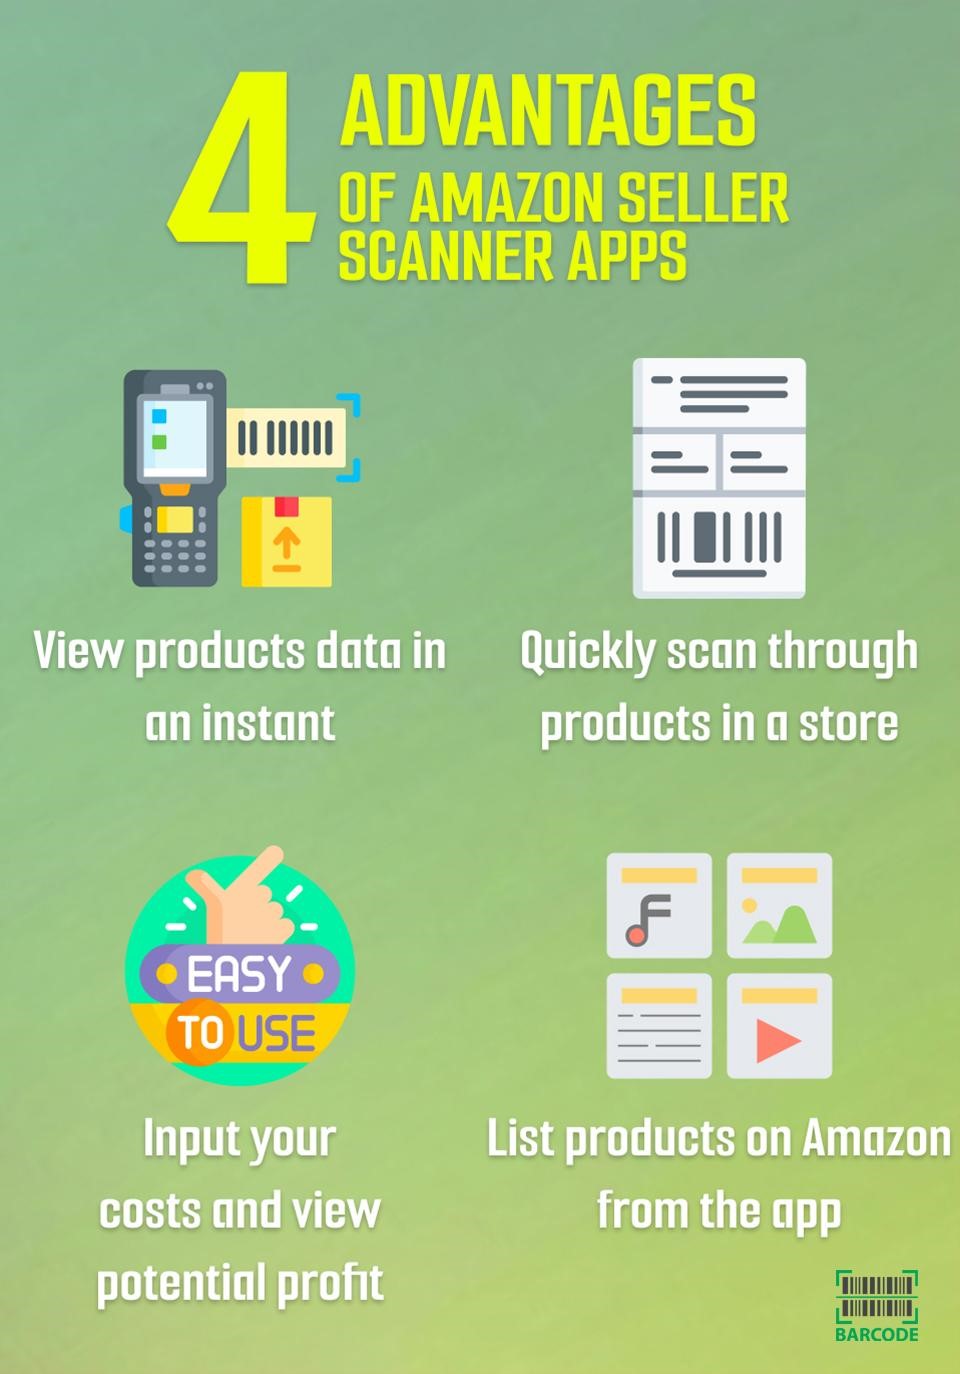 Benefits of an Amazon price scan app